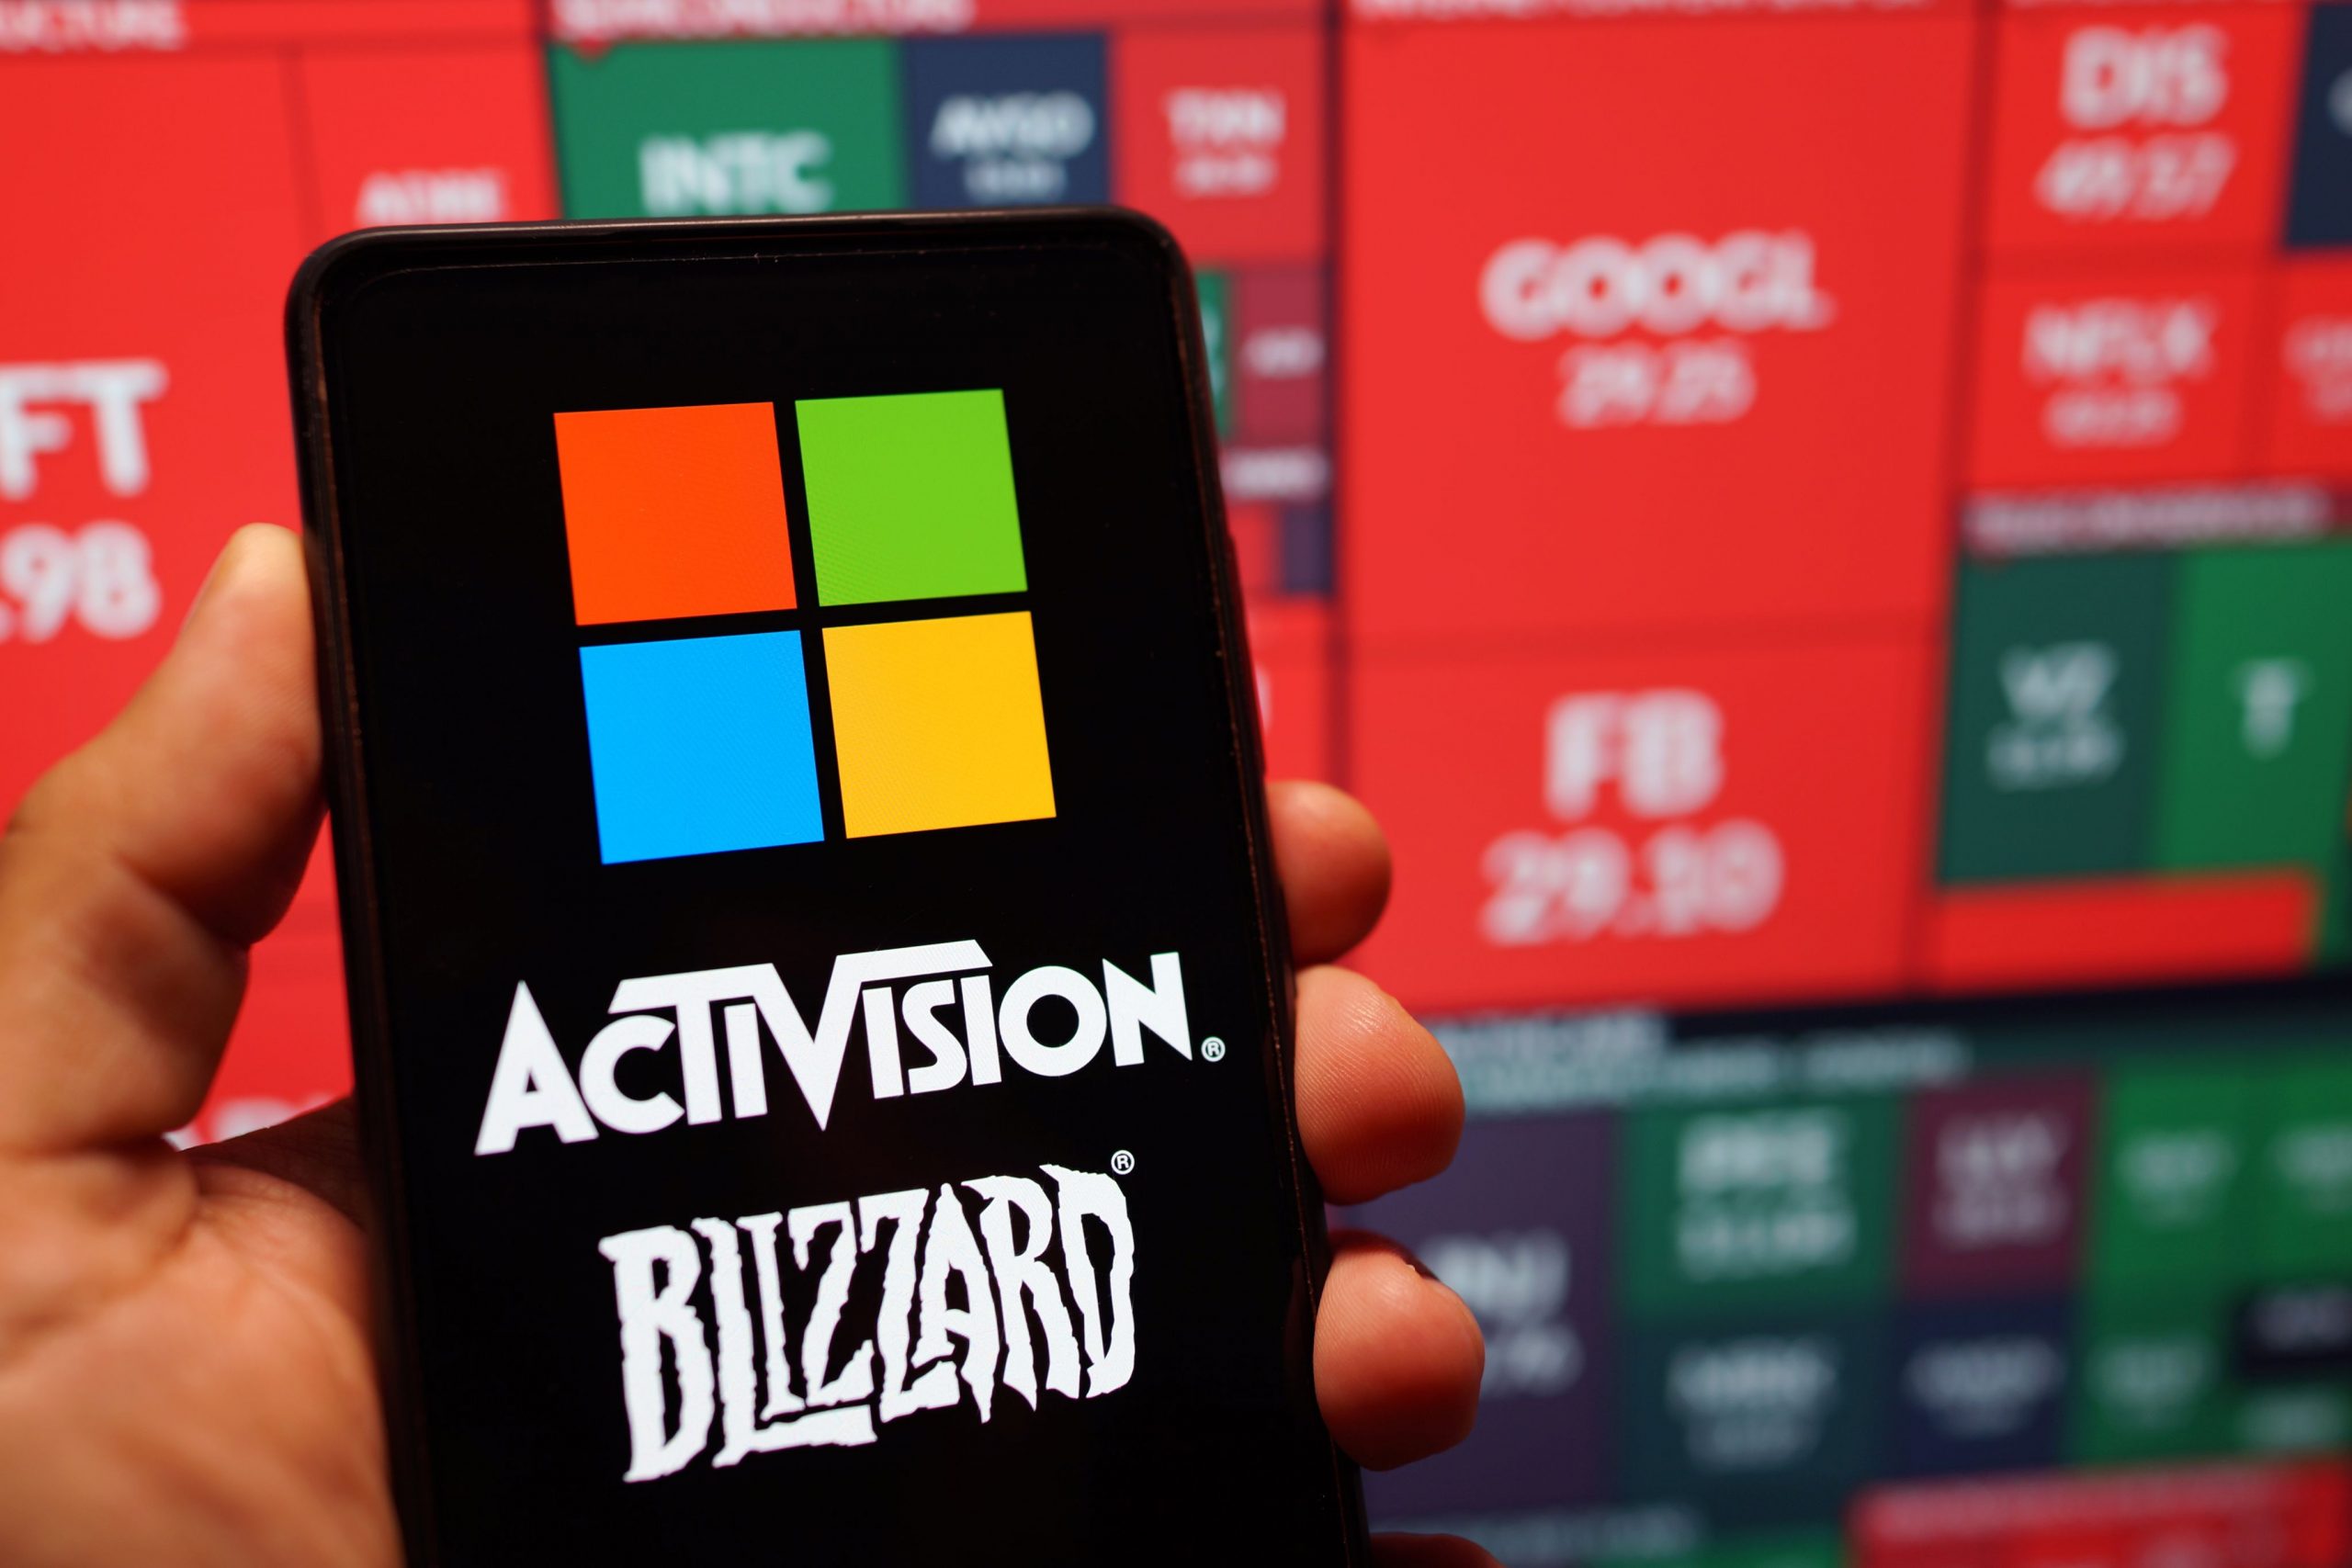 Microsoft Activision Takeover Approved By European Commission